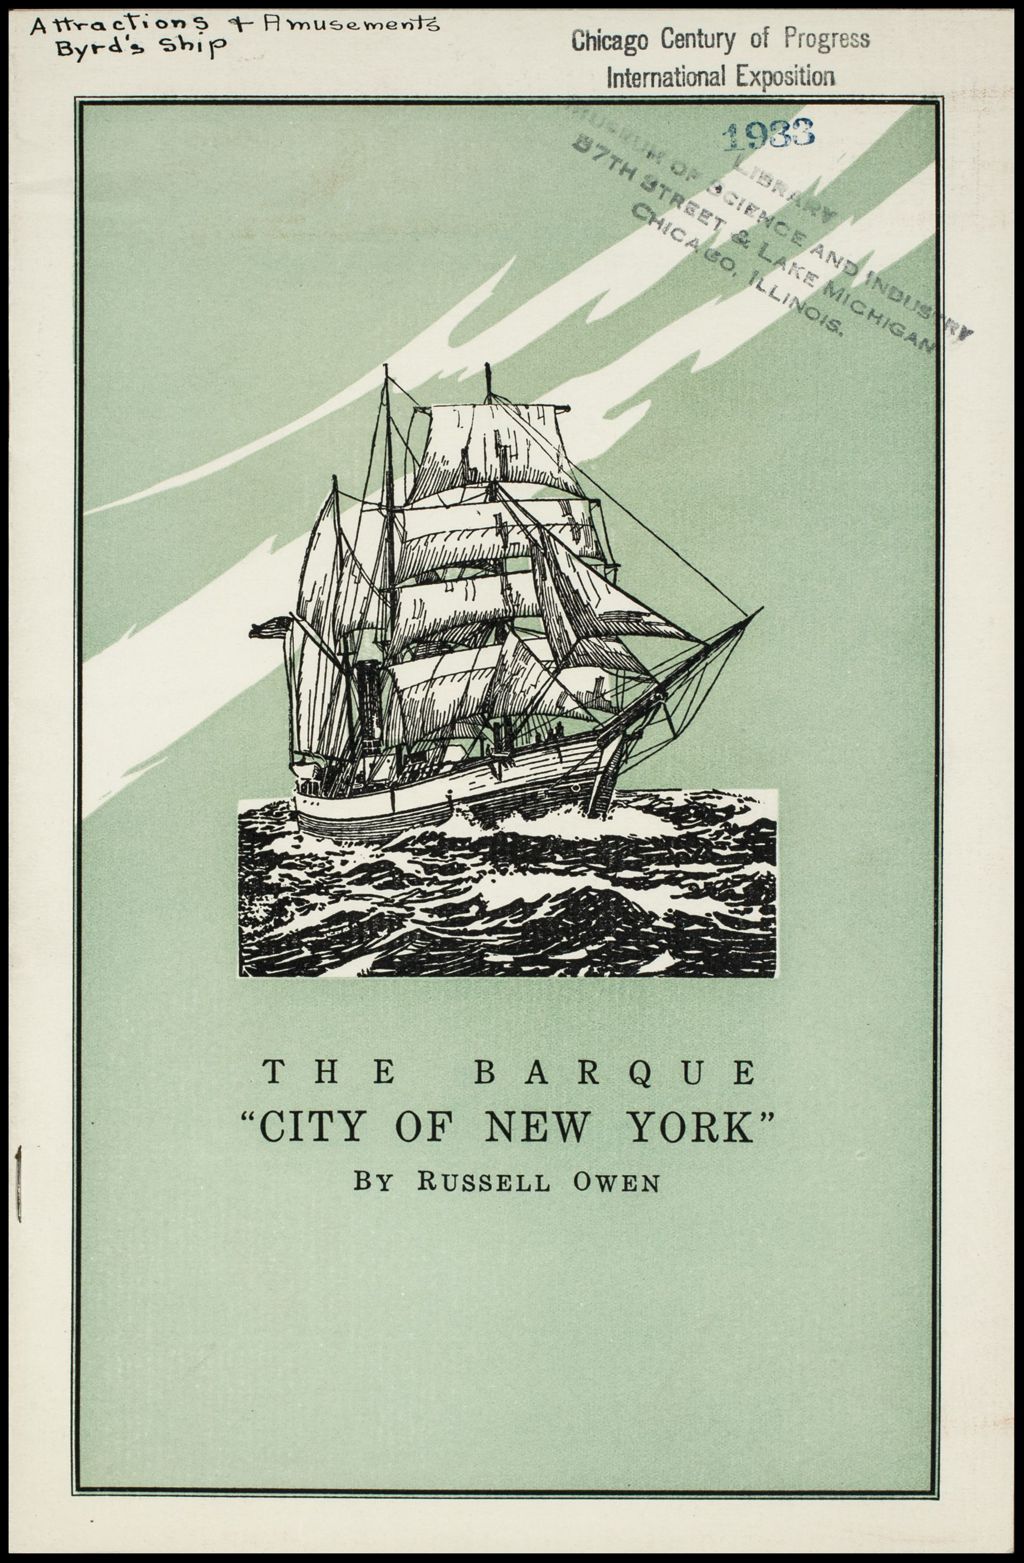 The Barque "City of New York", the heroic flagship of the Byrd Antarctic Expedition (Folder 16-239)